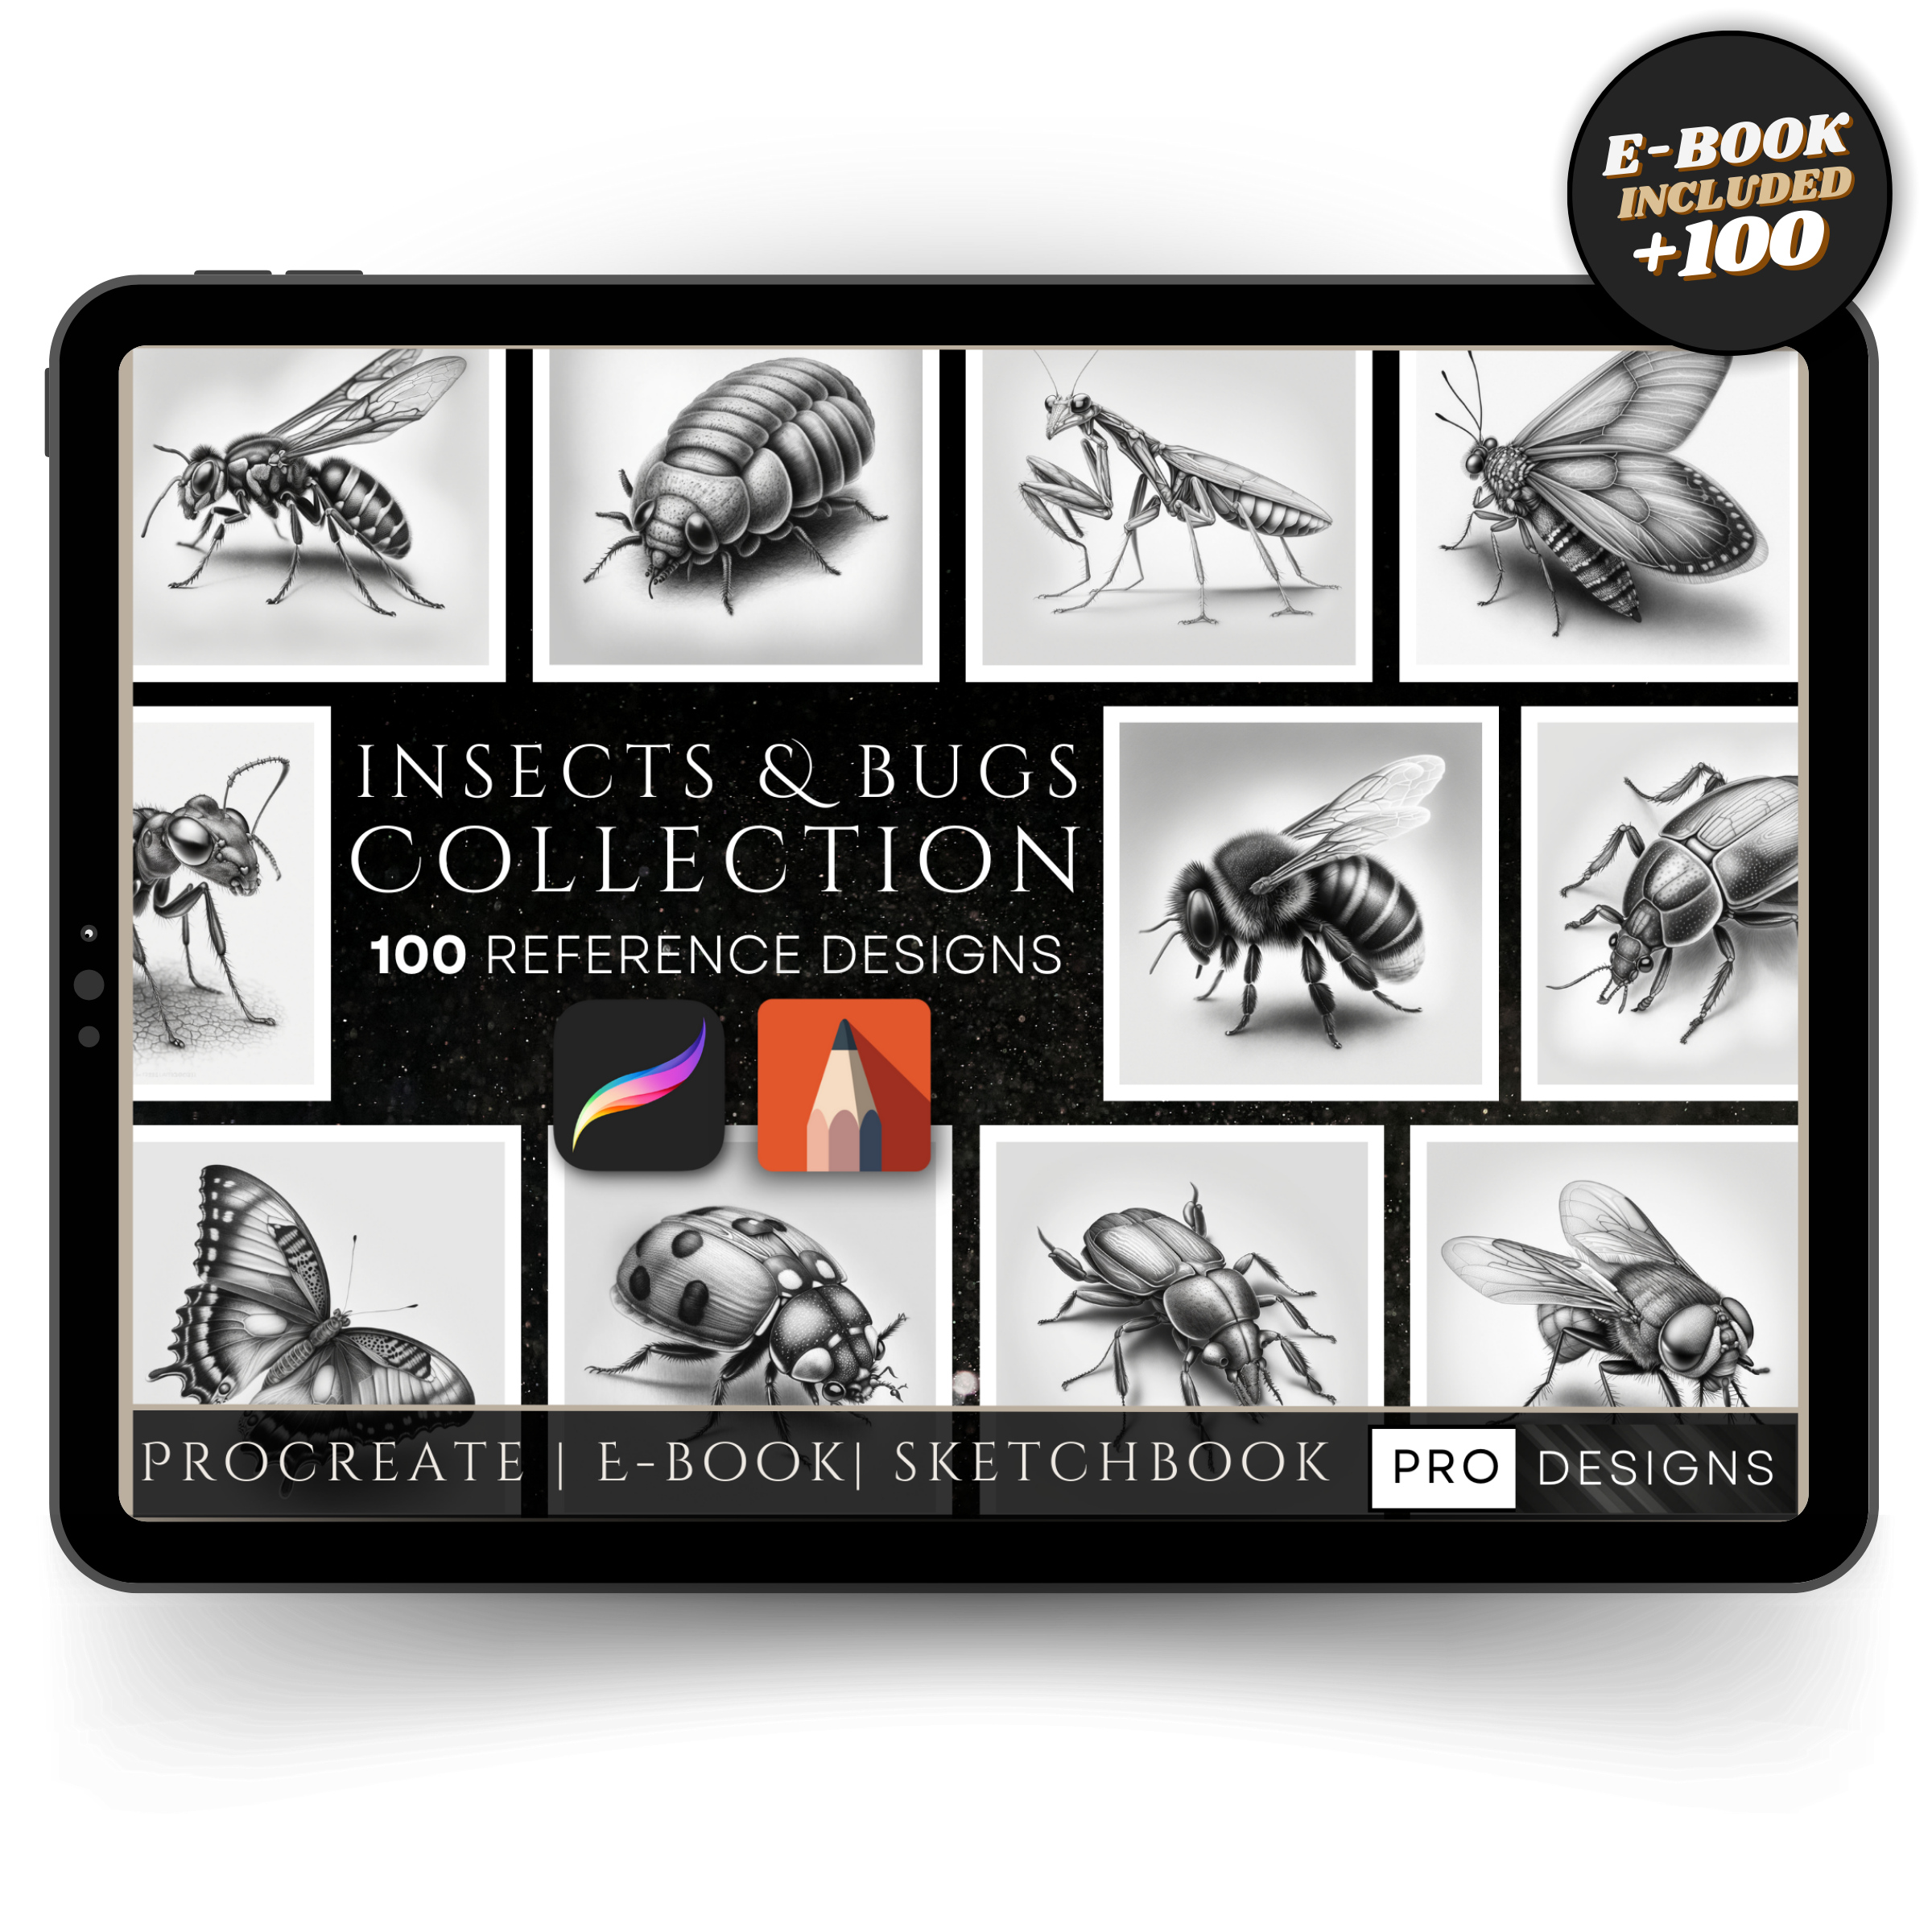 "Micro Marvels" - The Insects and Bugs Collection